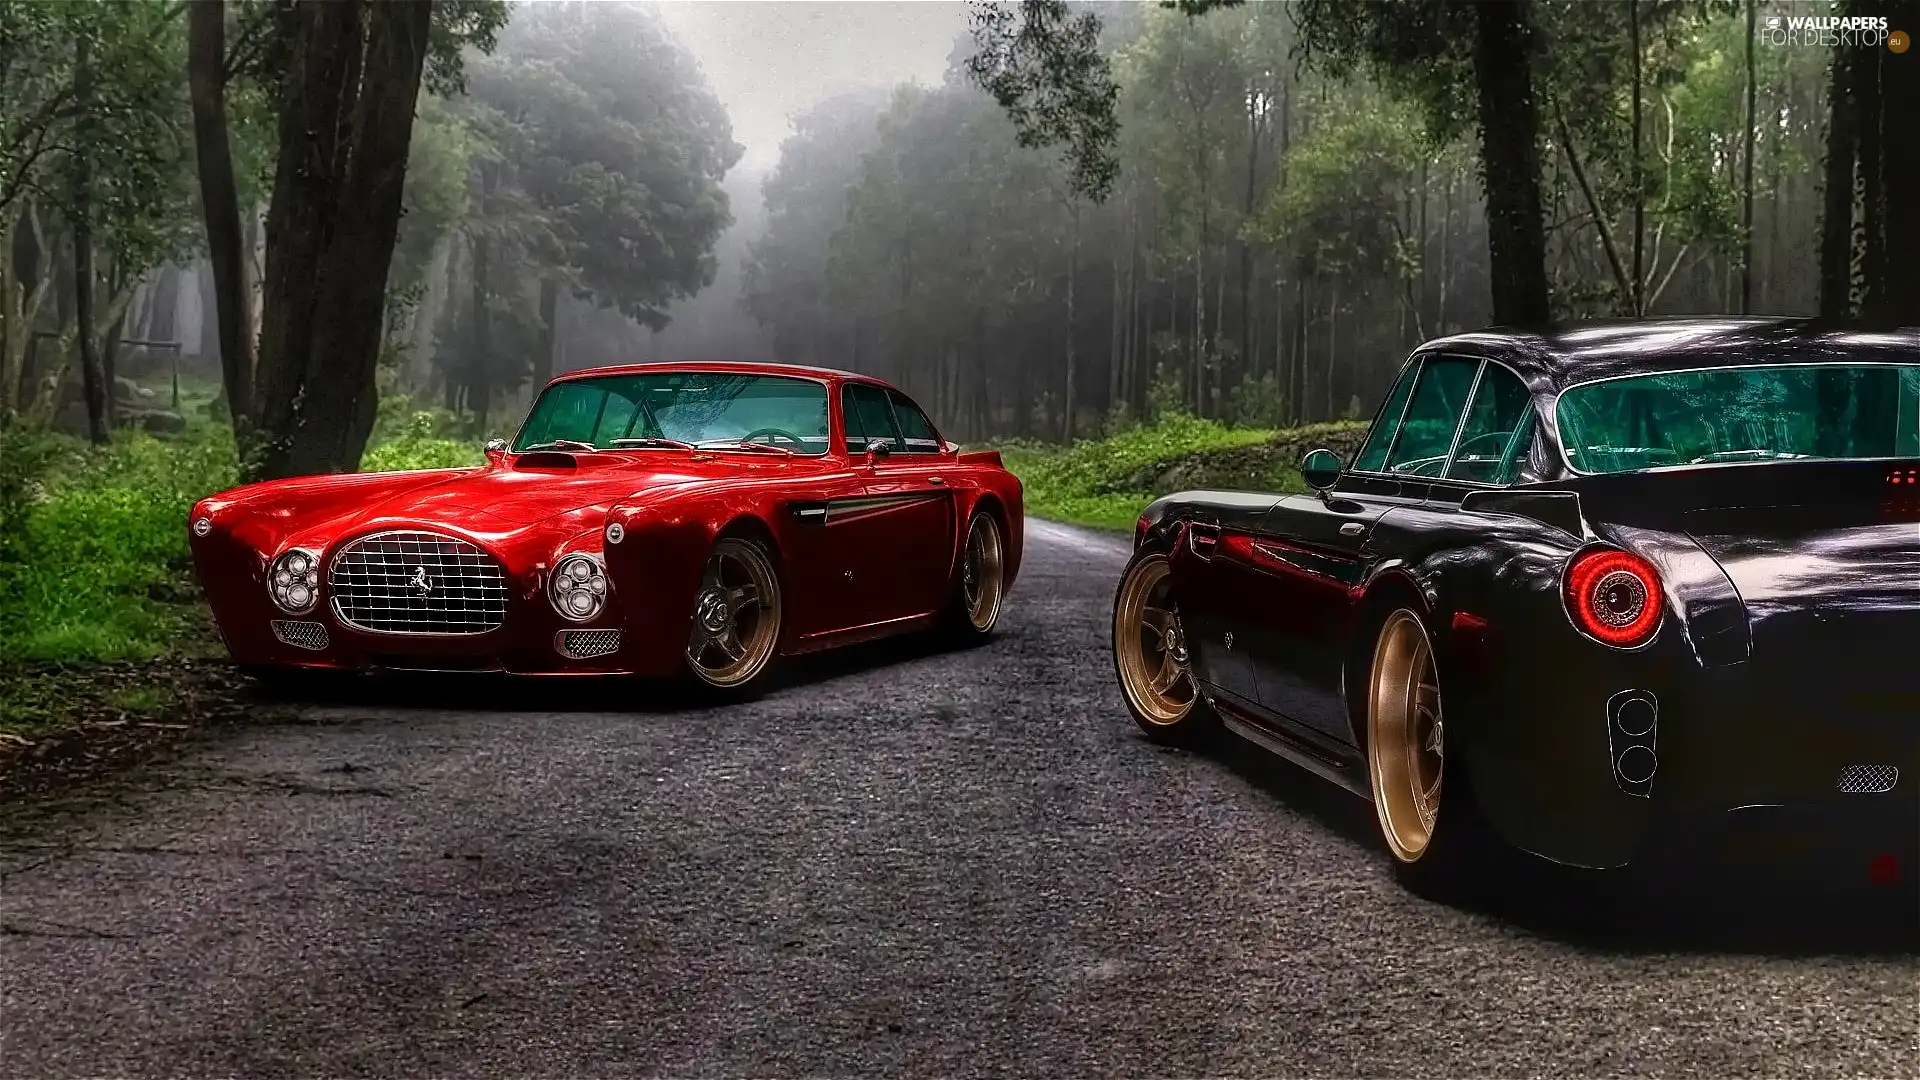 Hot Rods, forest